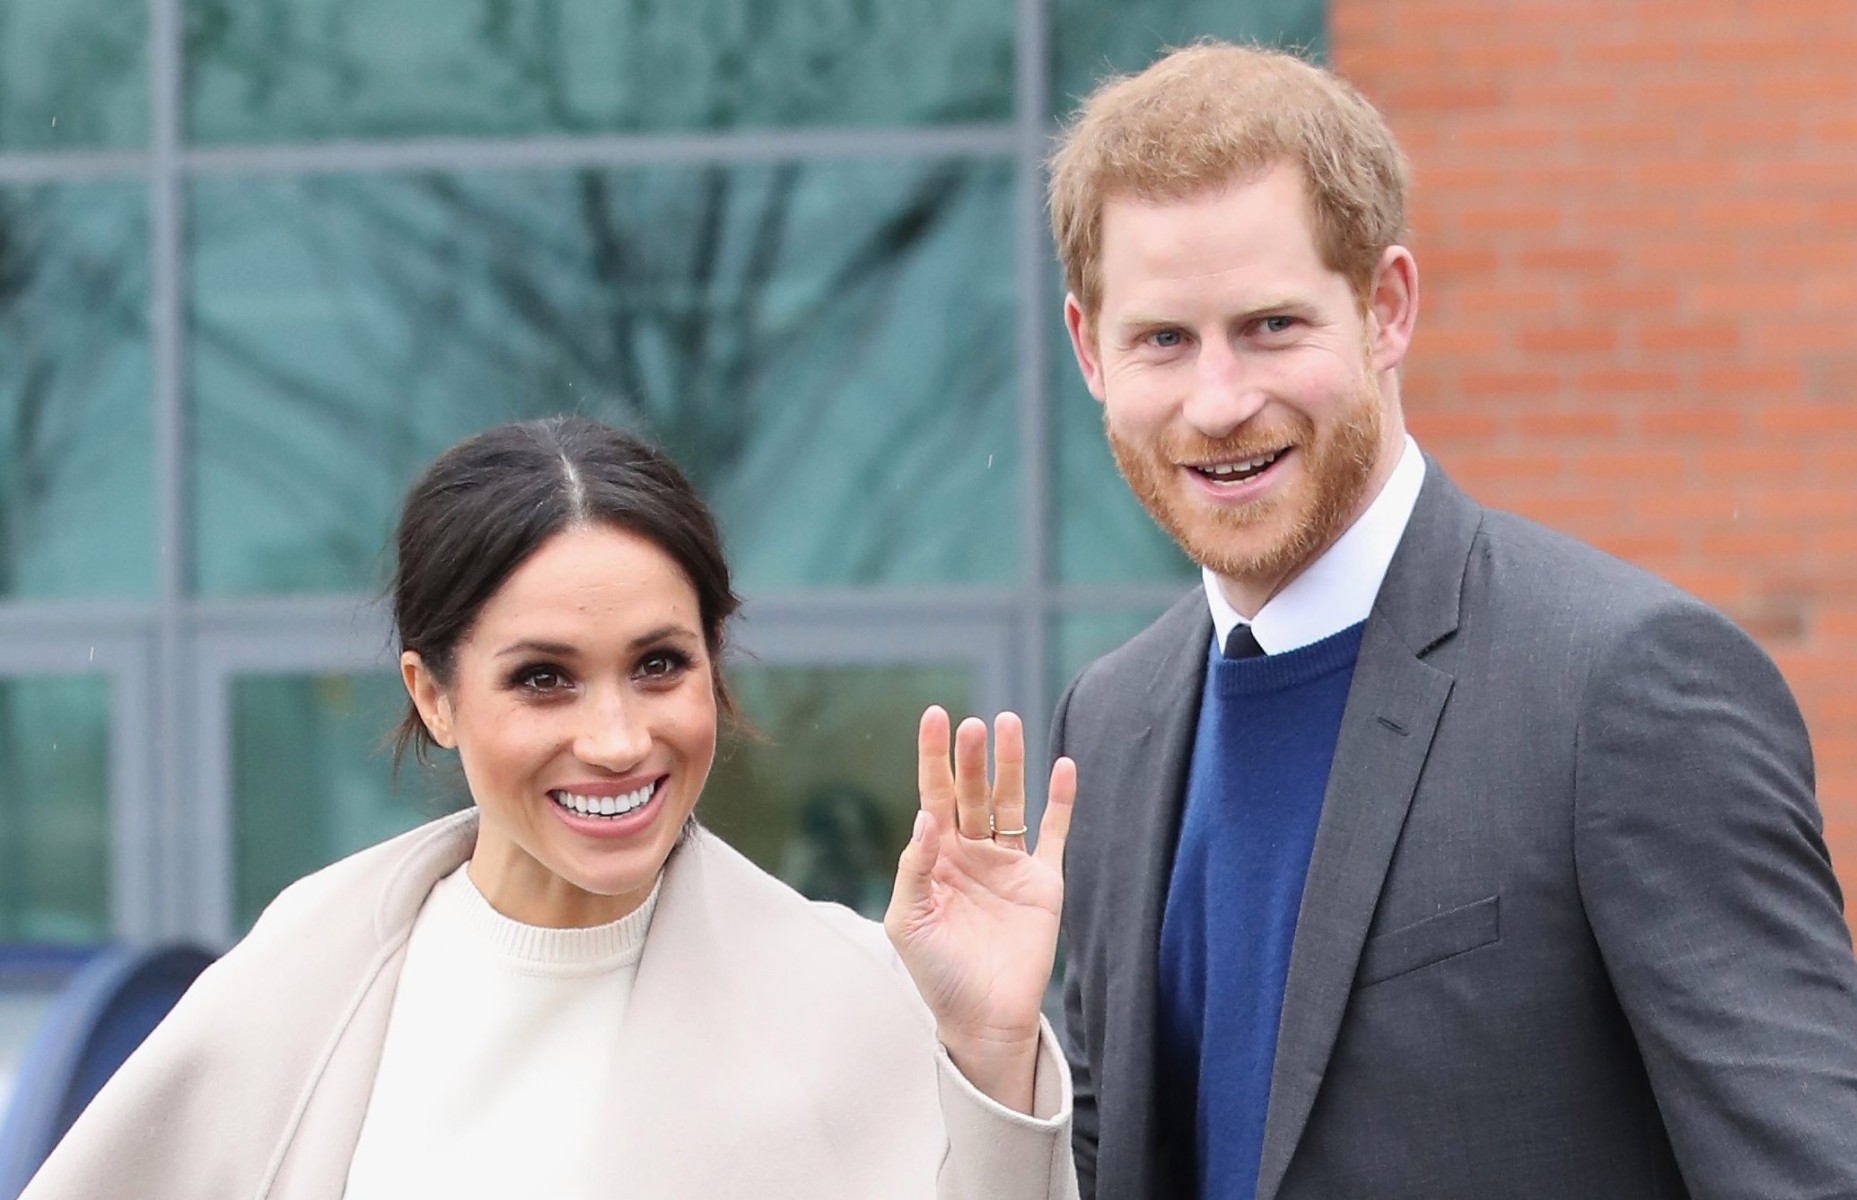 Prince Harry and Meghan Markle will return to the UK for a string of engagements after Megxit is finalised